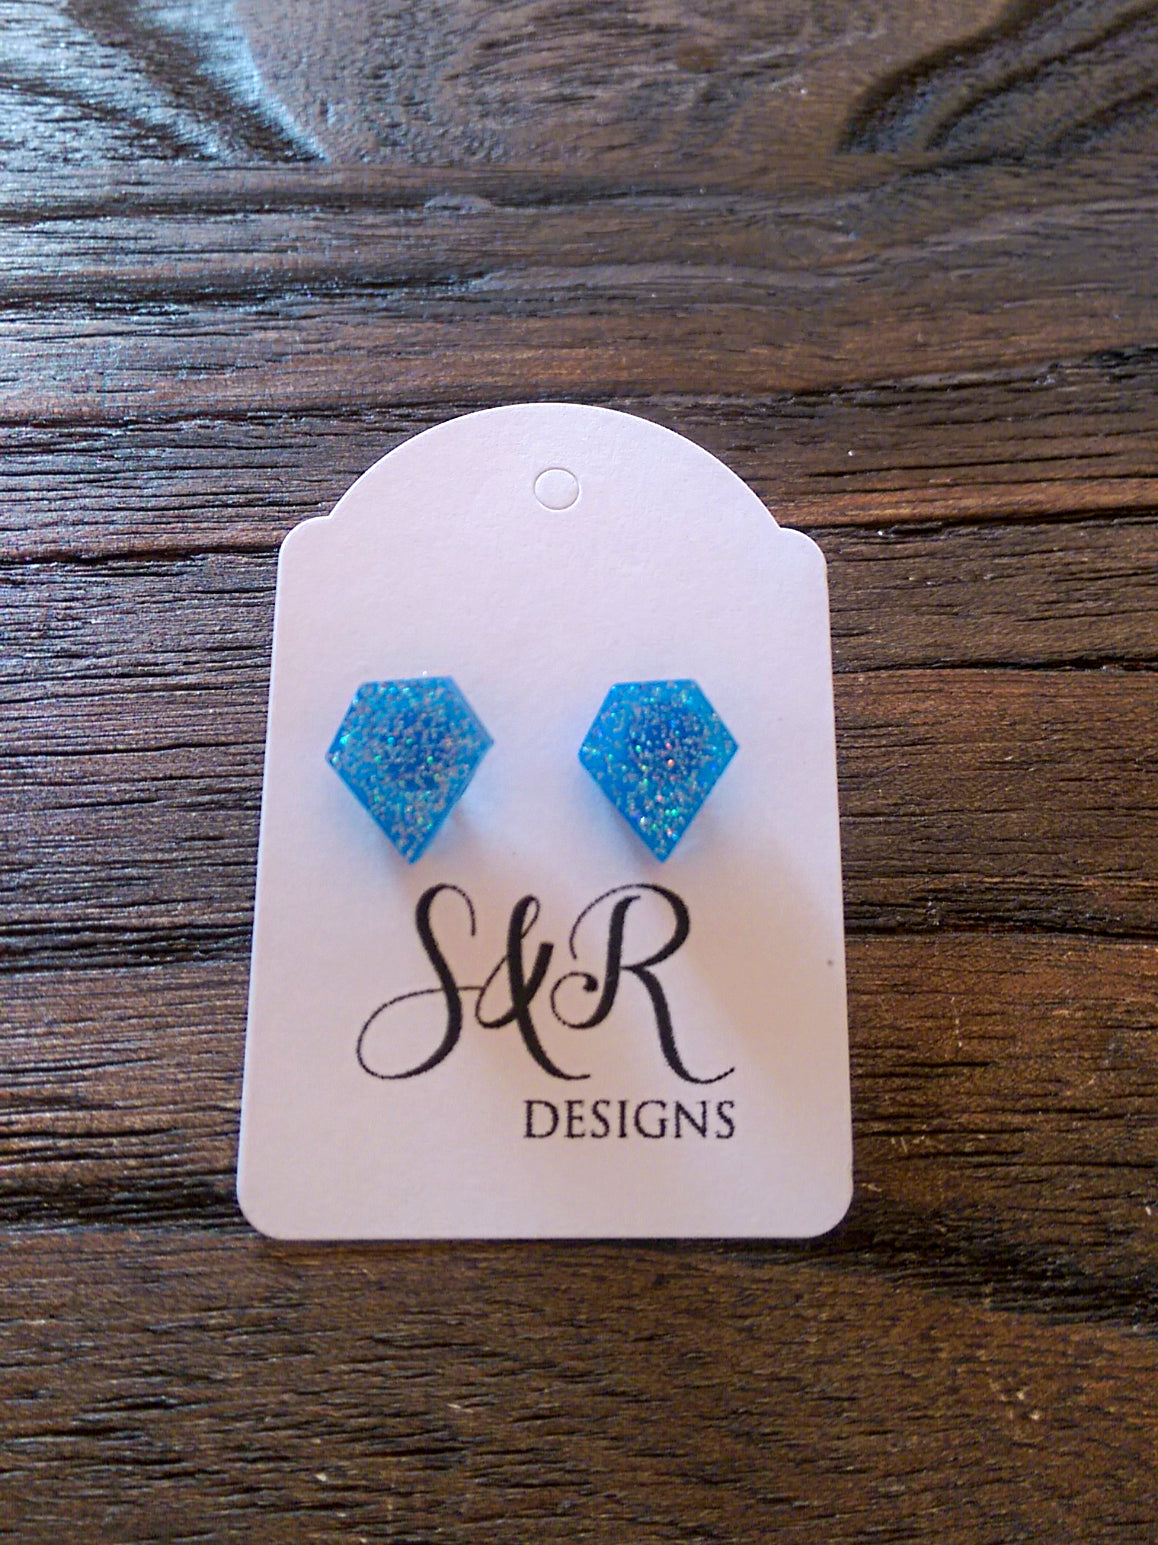 Diamond Cut Resin Stud Earrings, Blue Silver Holographic Glitter Earrings - Silver and Resin Designs